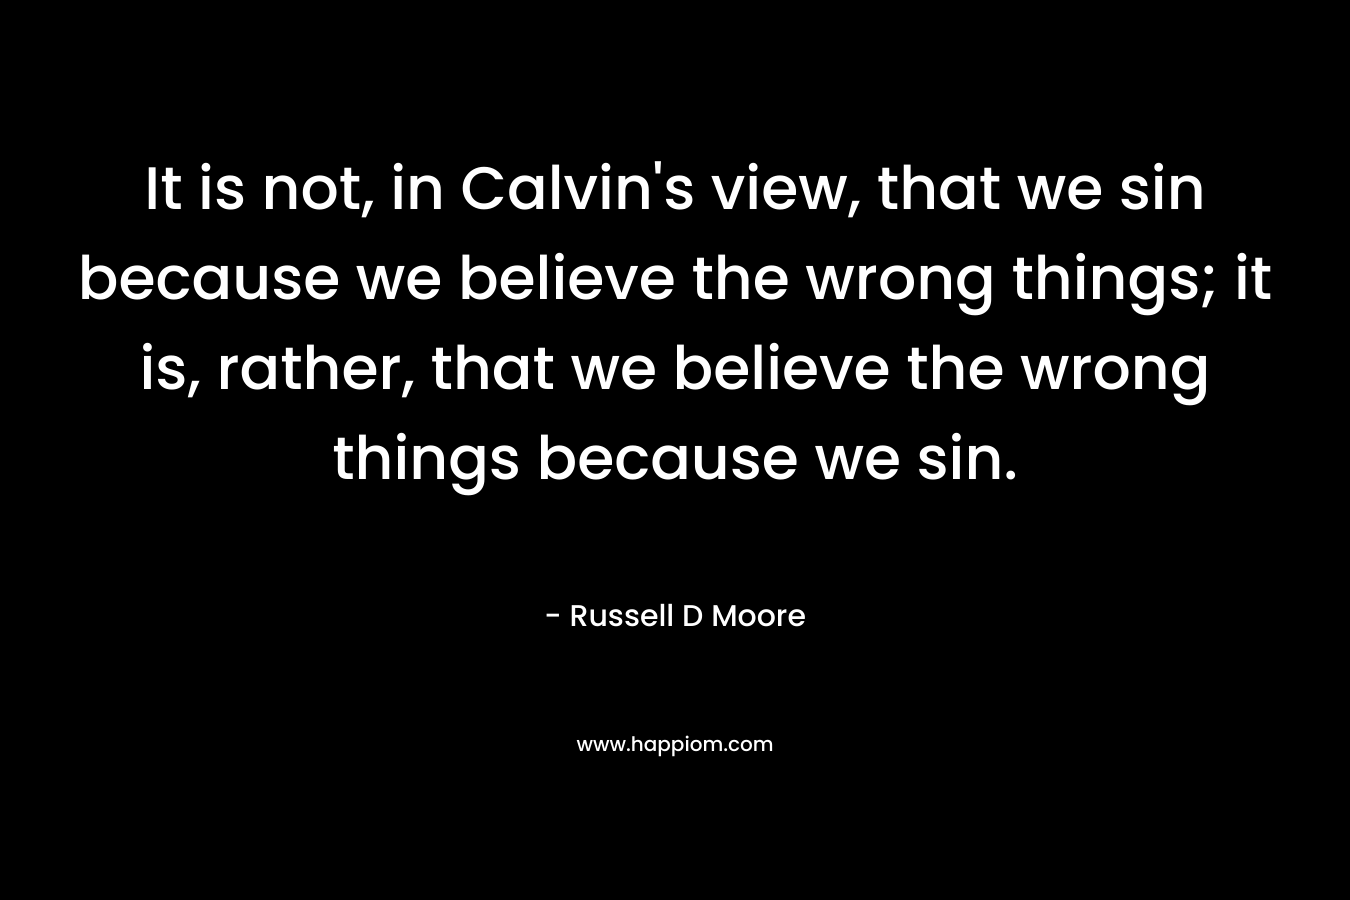 It is not, in Calvin’s view, that we sin because we believe the wrong things; it is, rather, that we believe the wrong things because we sin. – Russell D Moore